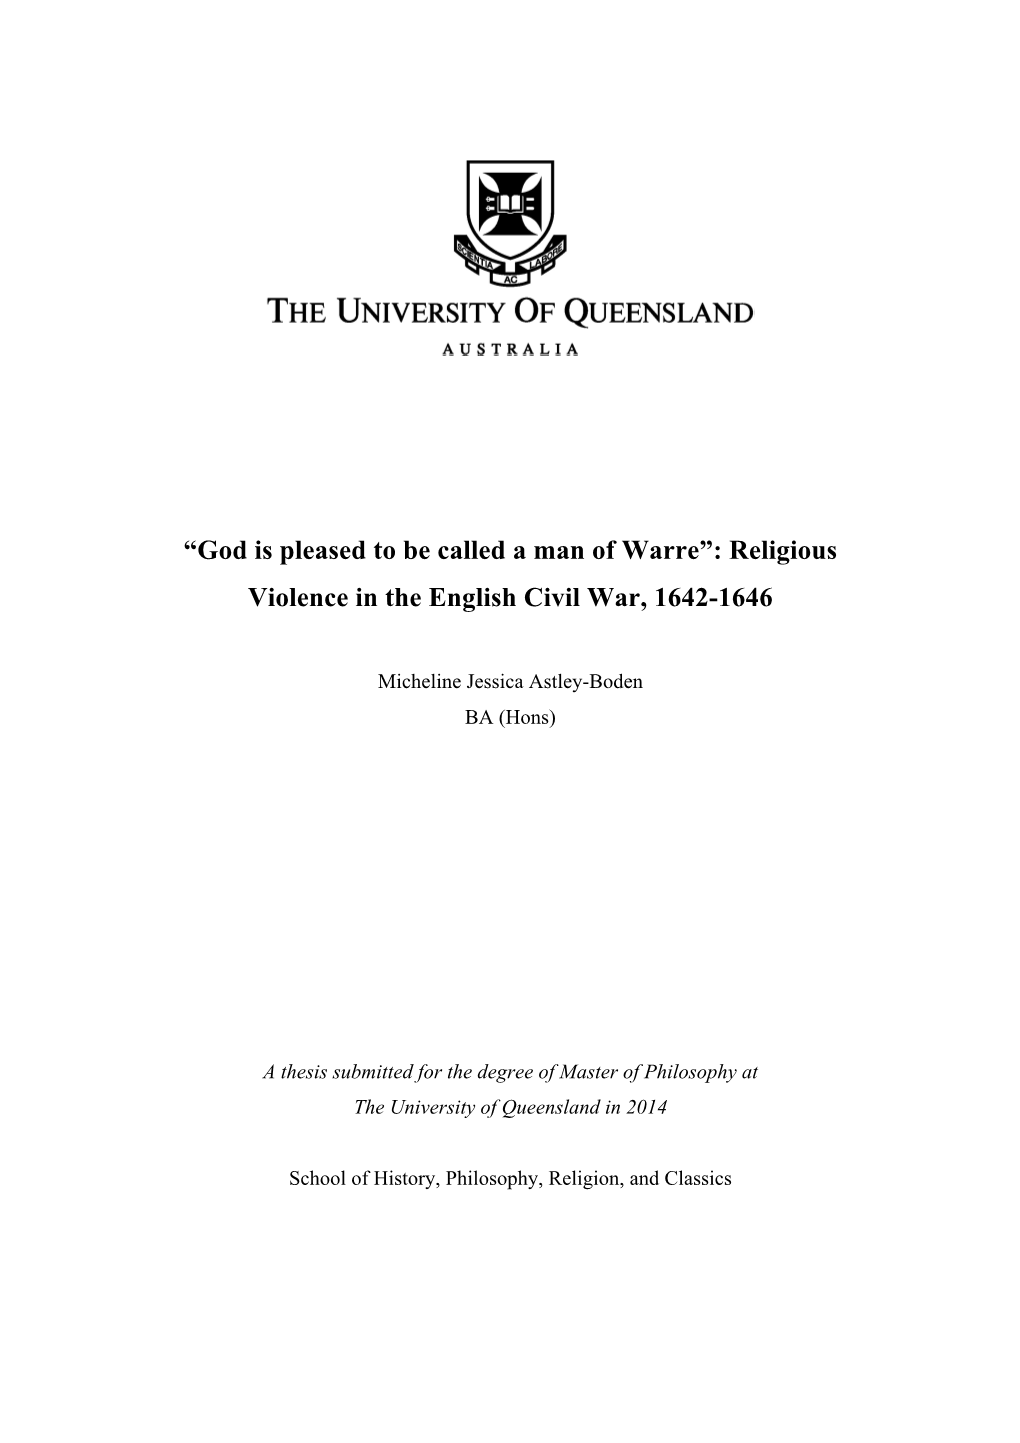 Religious Violence in the English Civil War, 1642-1646